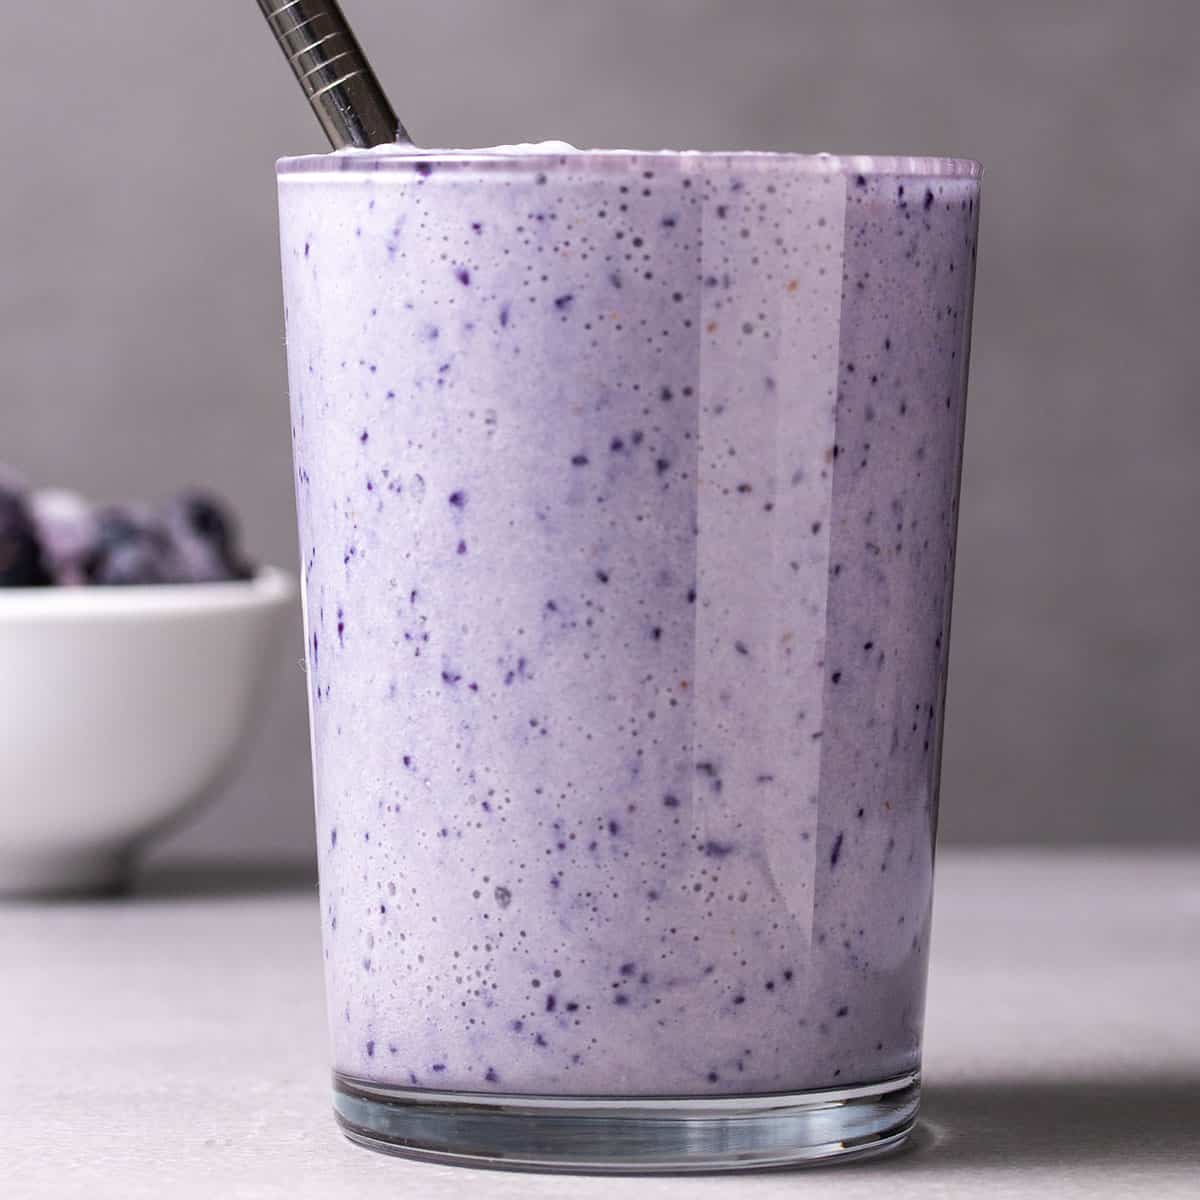 Vegan Blueberry Smoothie Low Carb High Protein Diabetes Strong